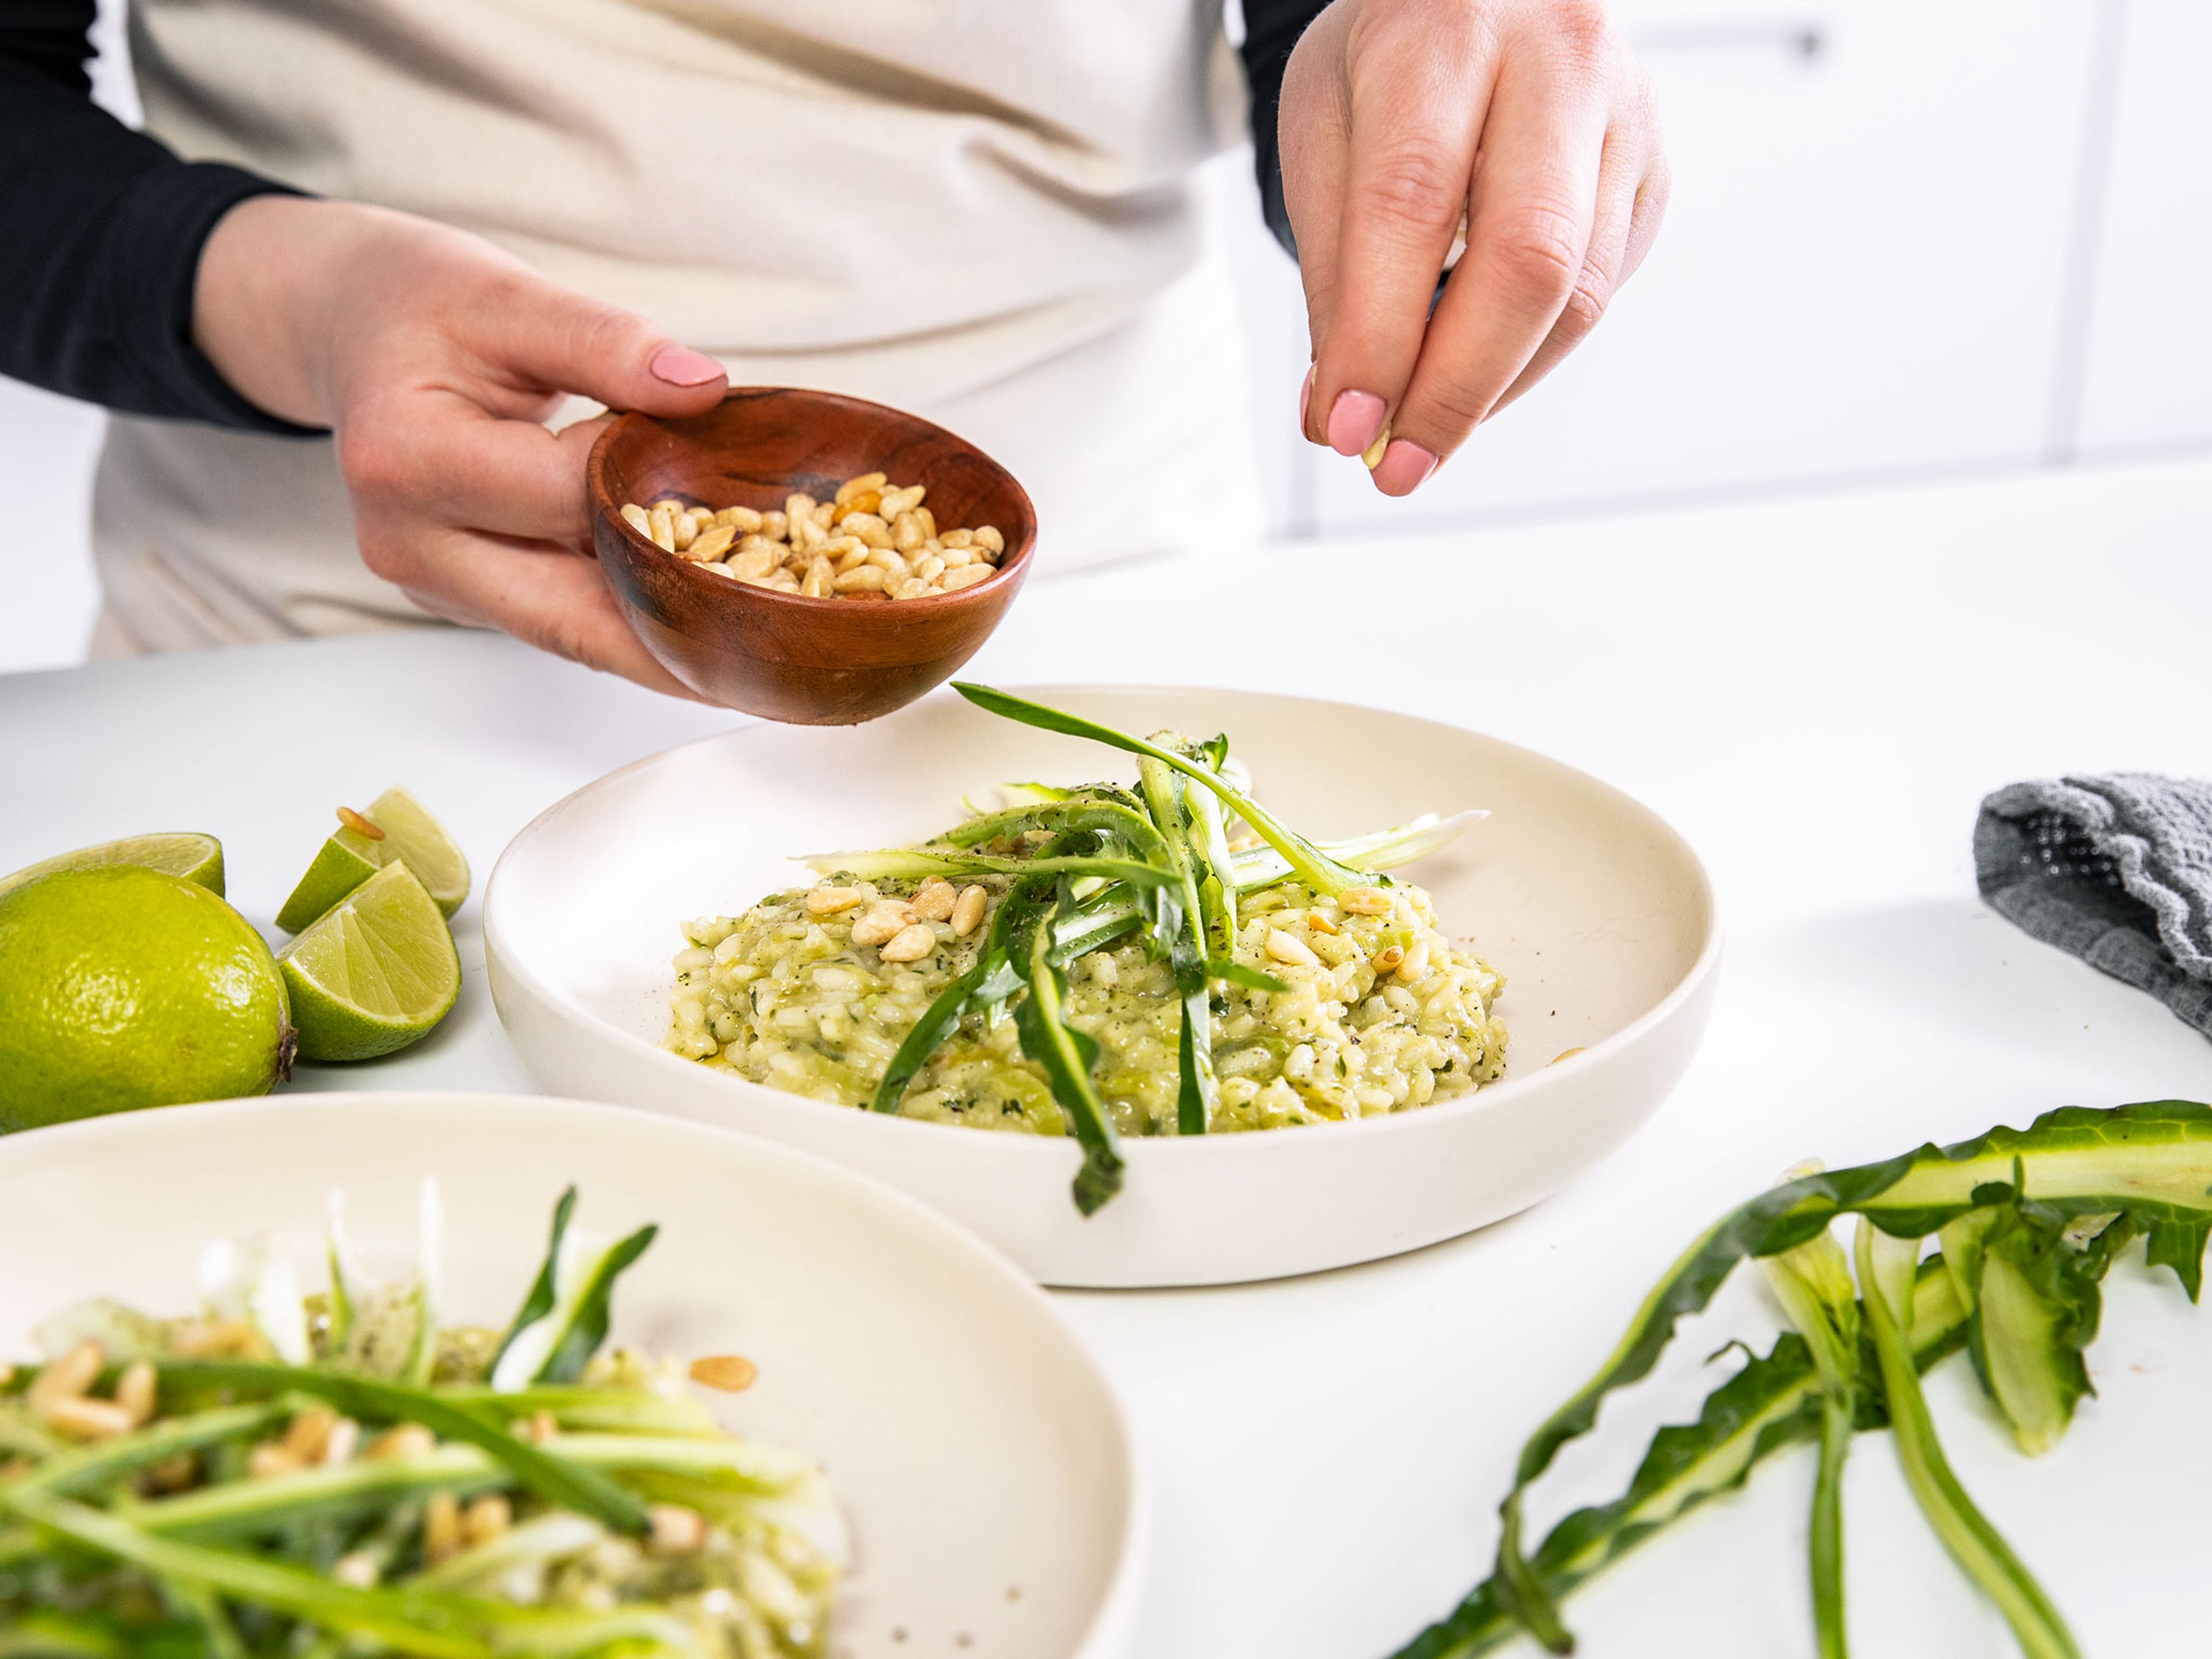 Once the rice is cooked, add butter, dandelion pesto, and lime zest to the pot and stir to combine. Season with salt and pepper to taste and serve green risotto with reserved dandelion leaves and toasted pine nuts. Enjoy!